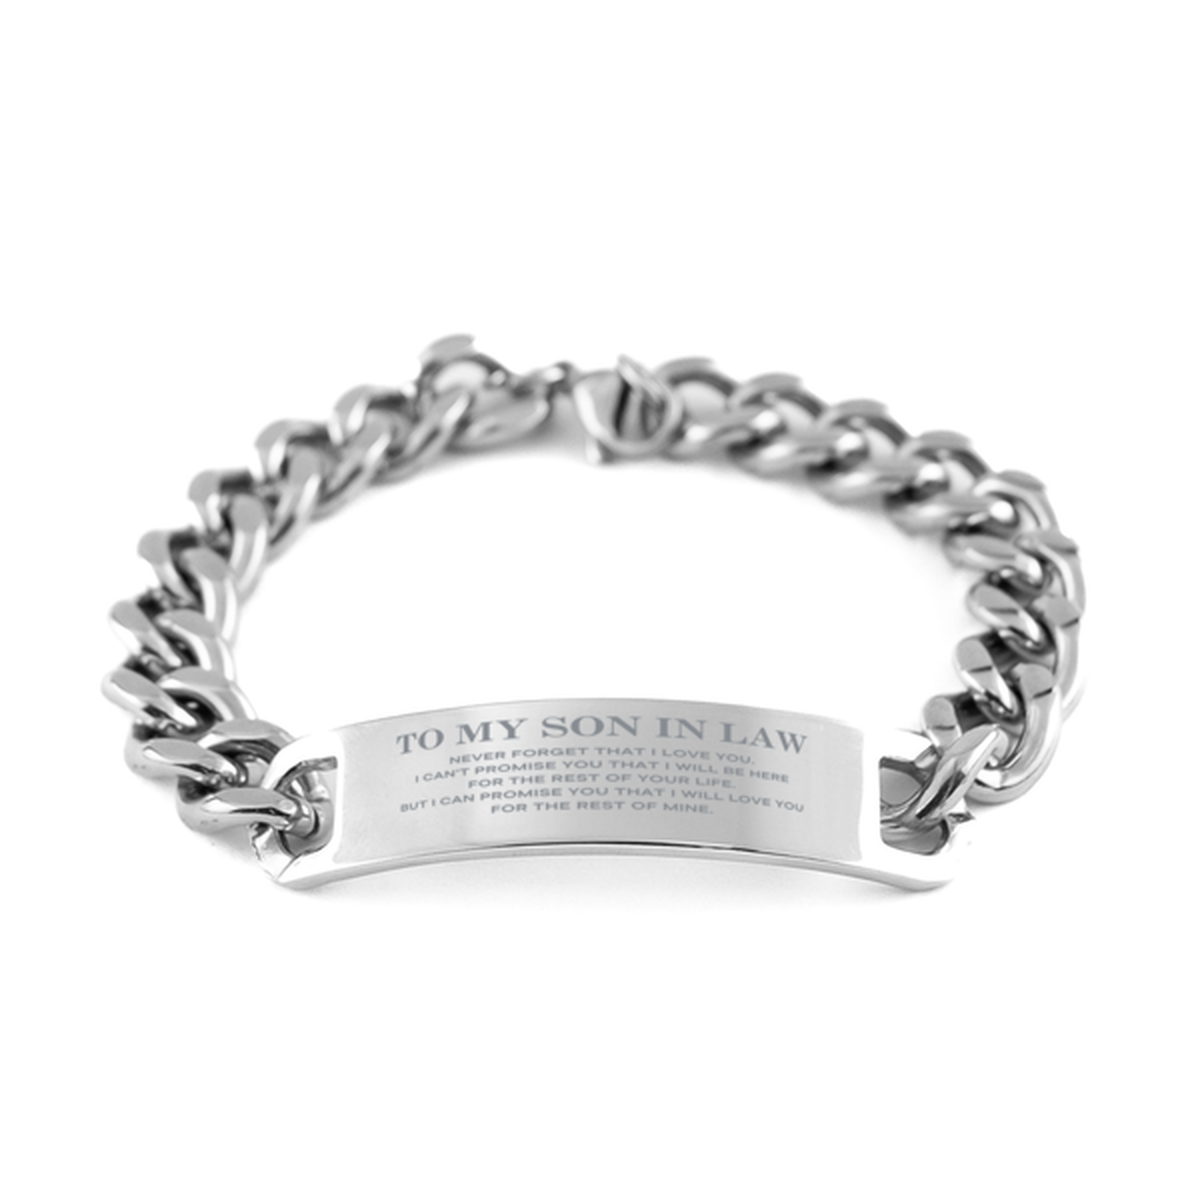 To My Son In Law Gifts, I will love you for the rest of mine, Love Son In Law Bracelet, Birthday Christmas Unique Cuban Chain Stainless Steel Bracelet For Son In Law